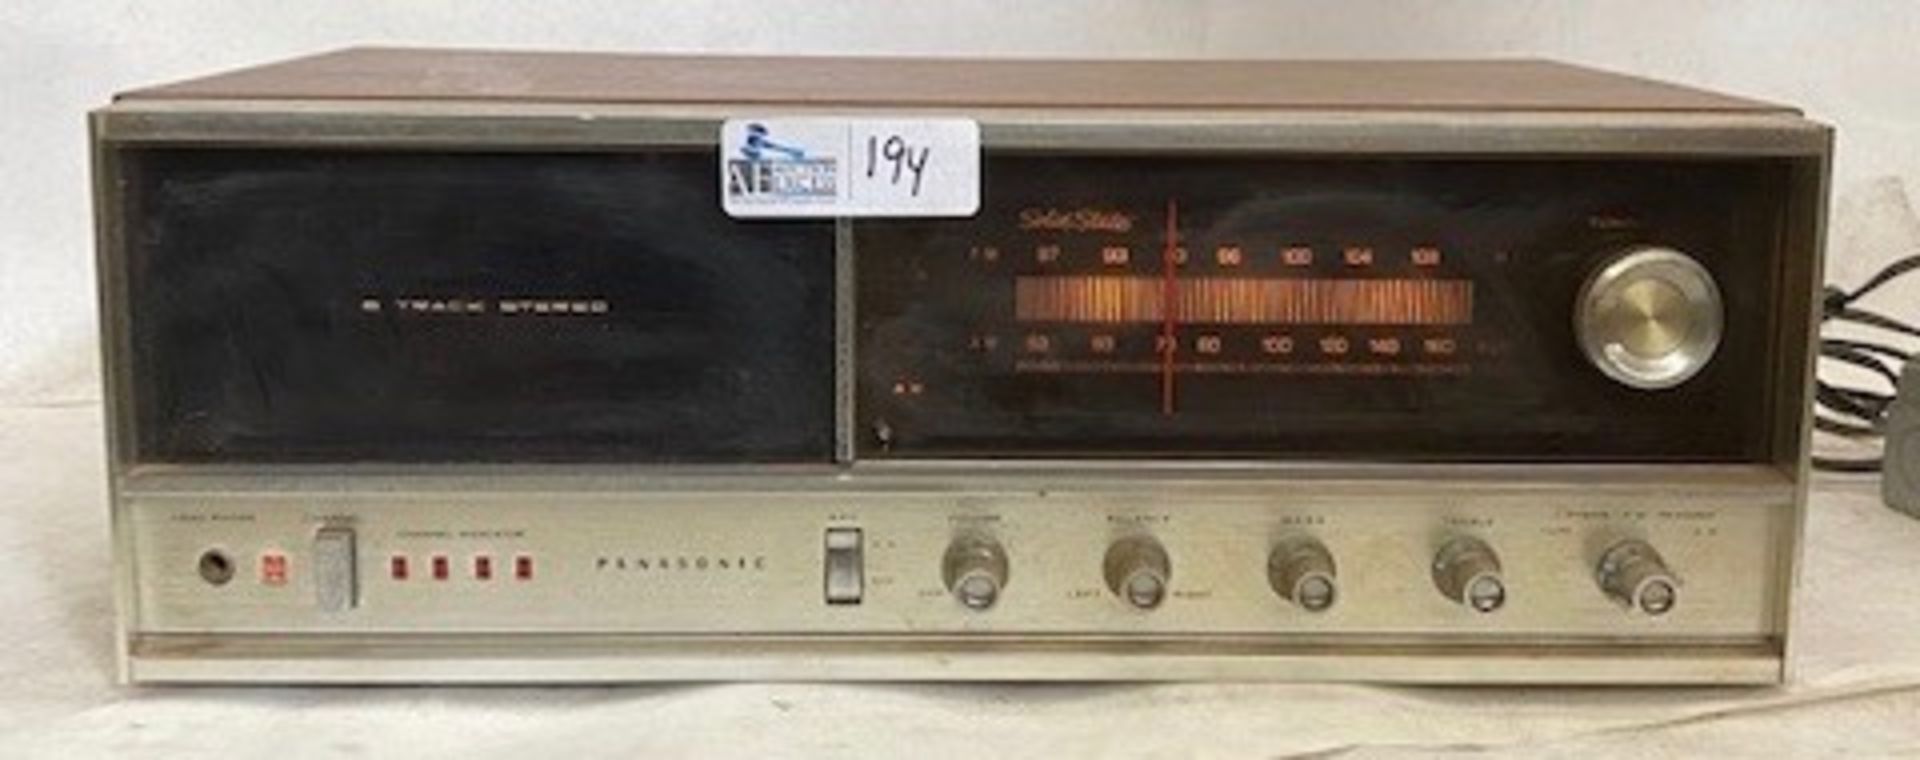 PANASONIC RE-7070 8 TRACK STEREO RECEIVER